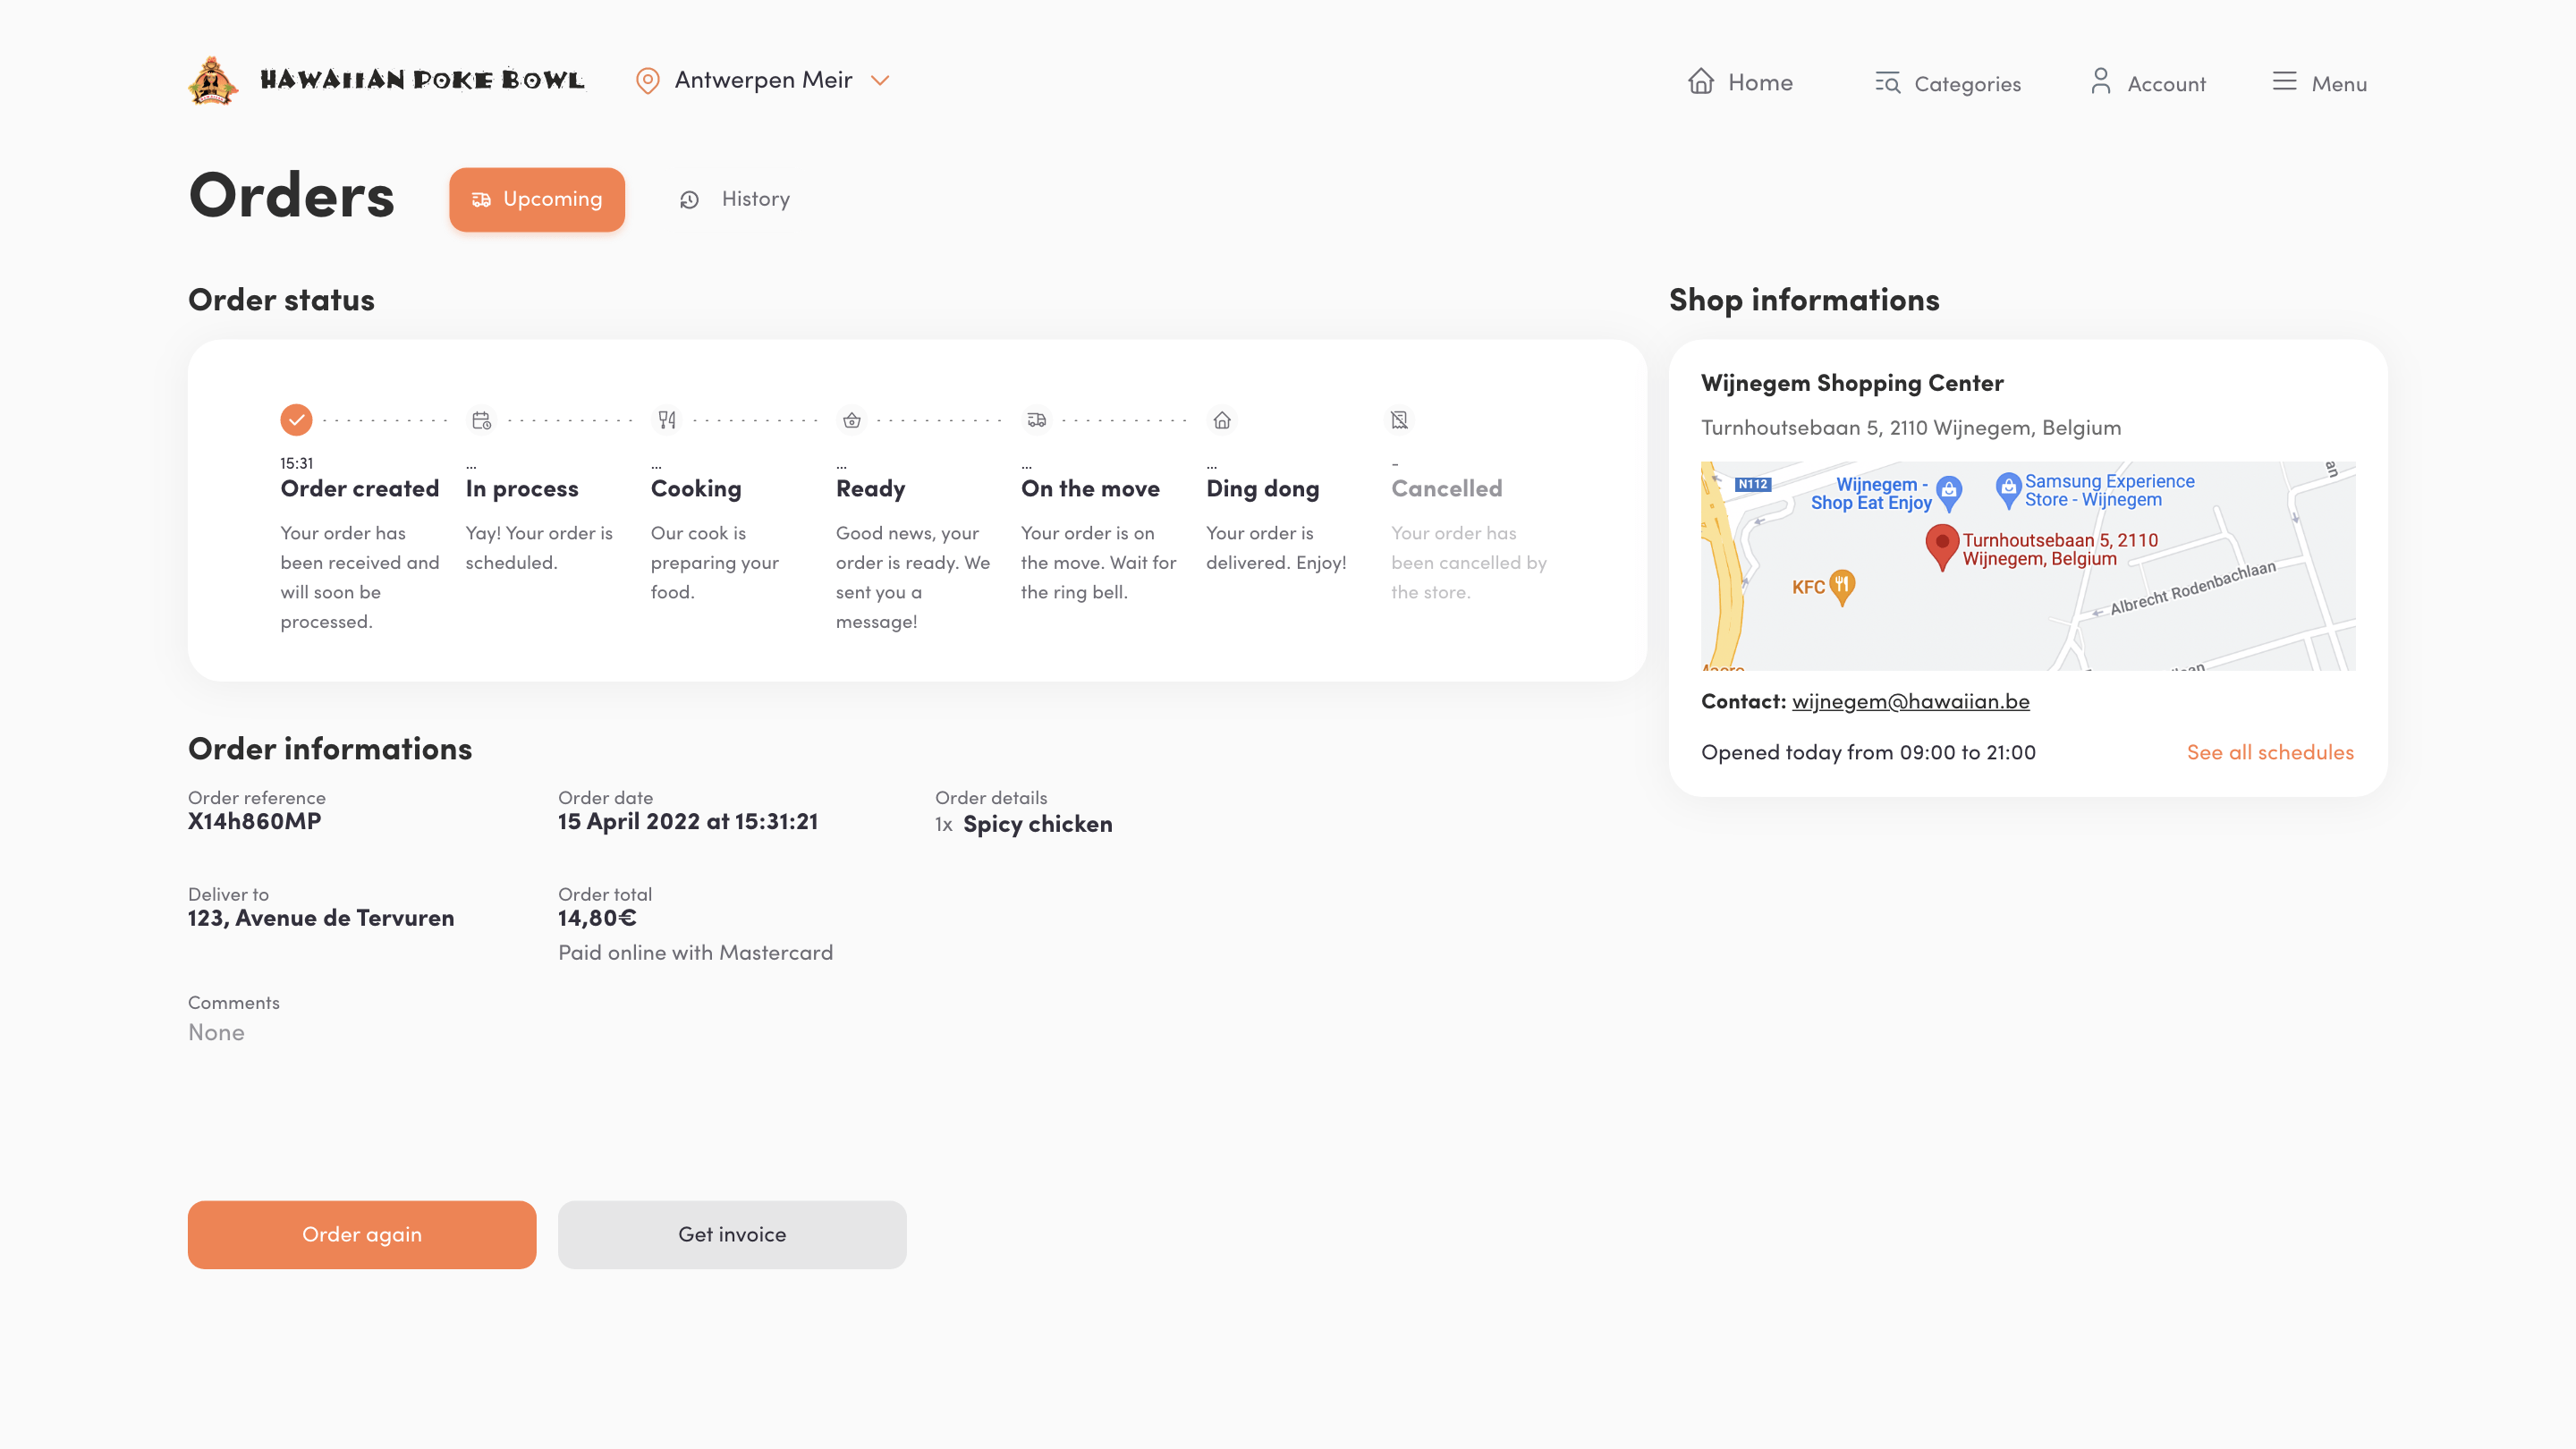 Tracking page with all the steps in which your order is currently in